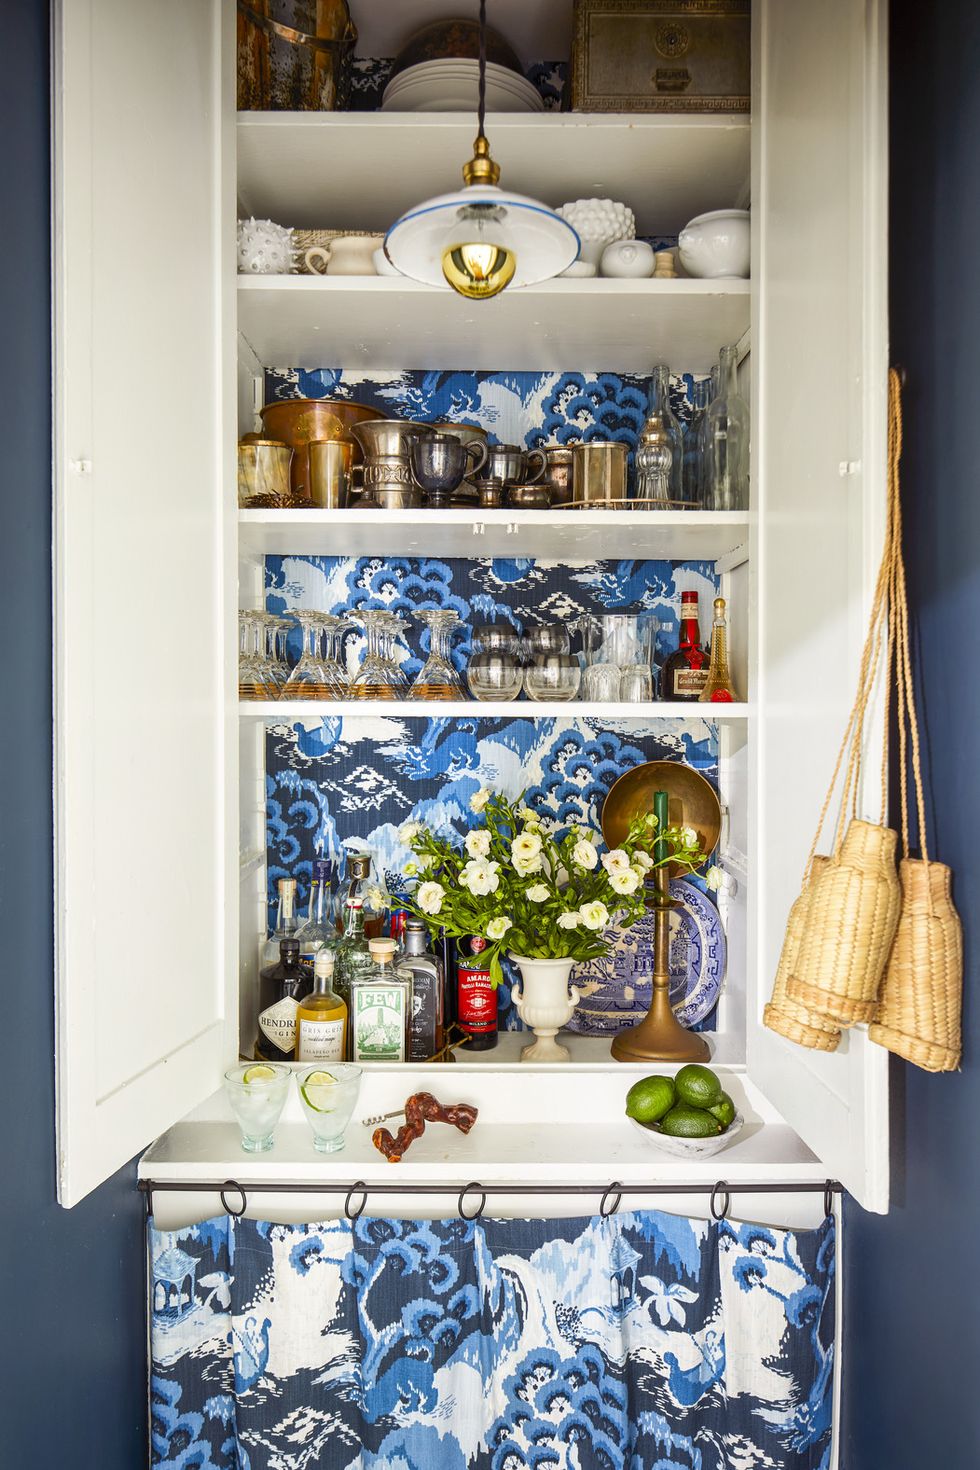 chicago, il apartment of devin kirk, vp of merchandising at jayson home pantry bar wall paint hague blue, farrow  ball fabric road to canton, robert allen light vintage enamel from france glassware vintage and beldi from jayson home